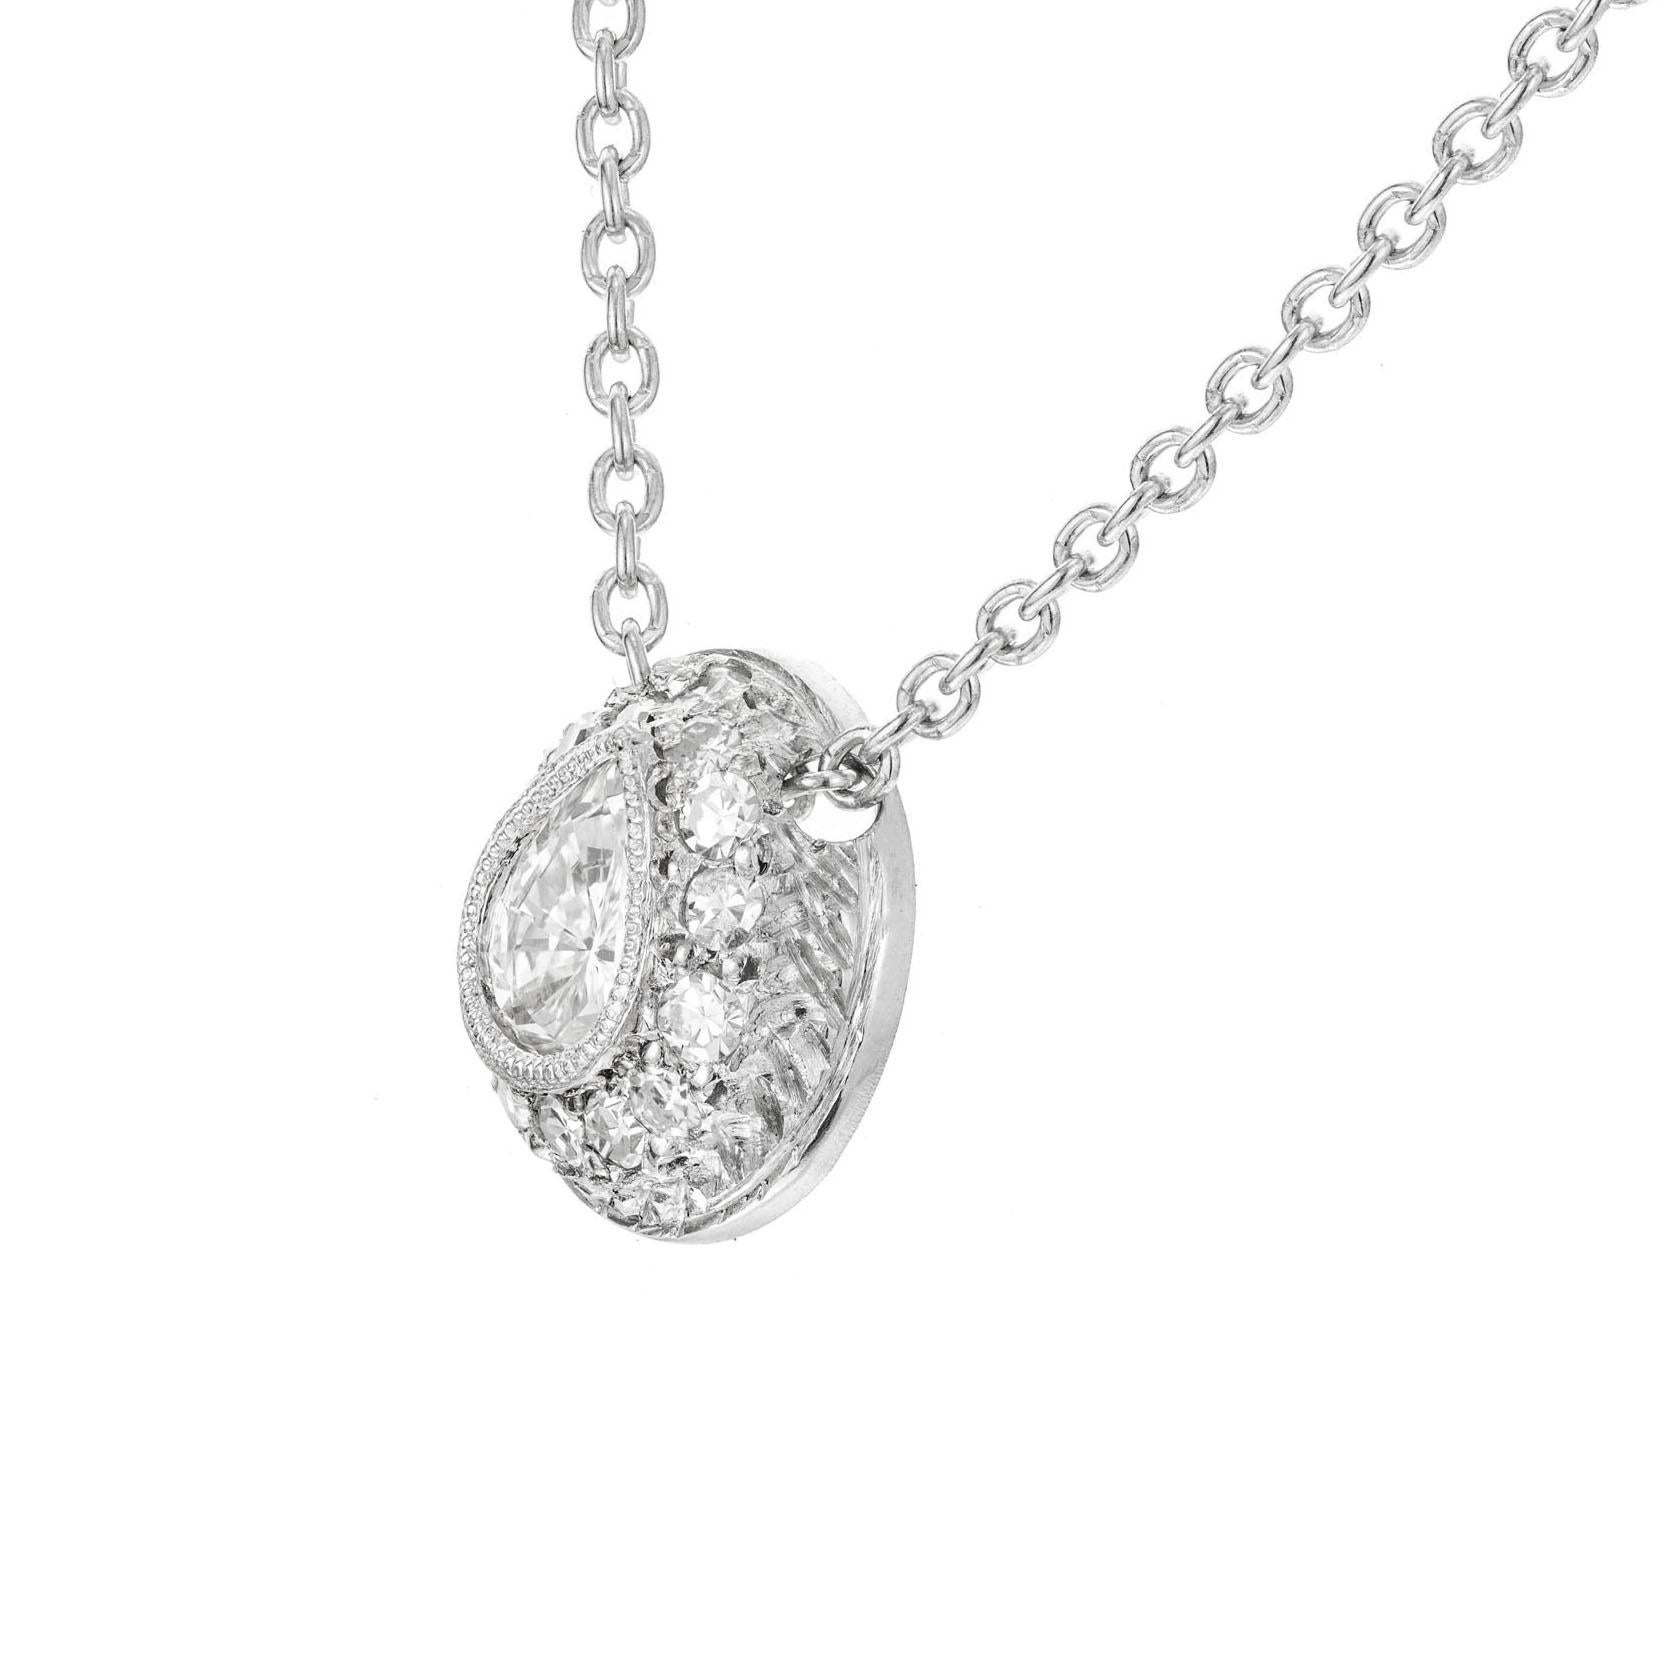 Platinum domed pendant slide necklace. Pear shaped center diamonds in a Platinum domed setting with 15 round pave set diamonds. Engraving and beaded. 16 inches in length. 

1 pear shape diamonds approx. total weight .43cts, H, SI1
15 round diamonds